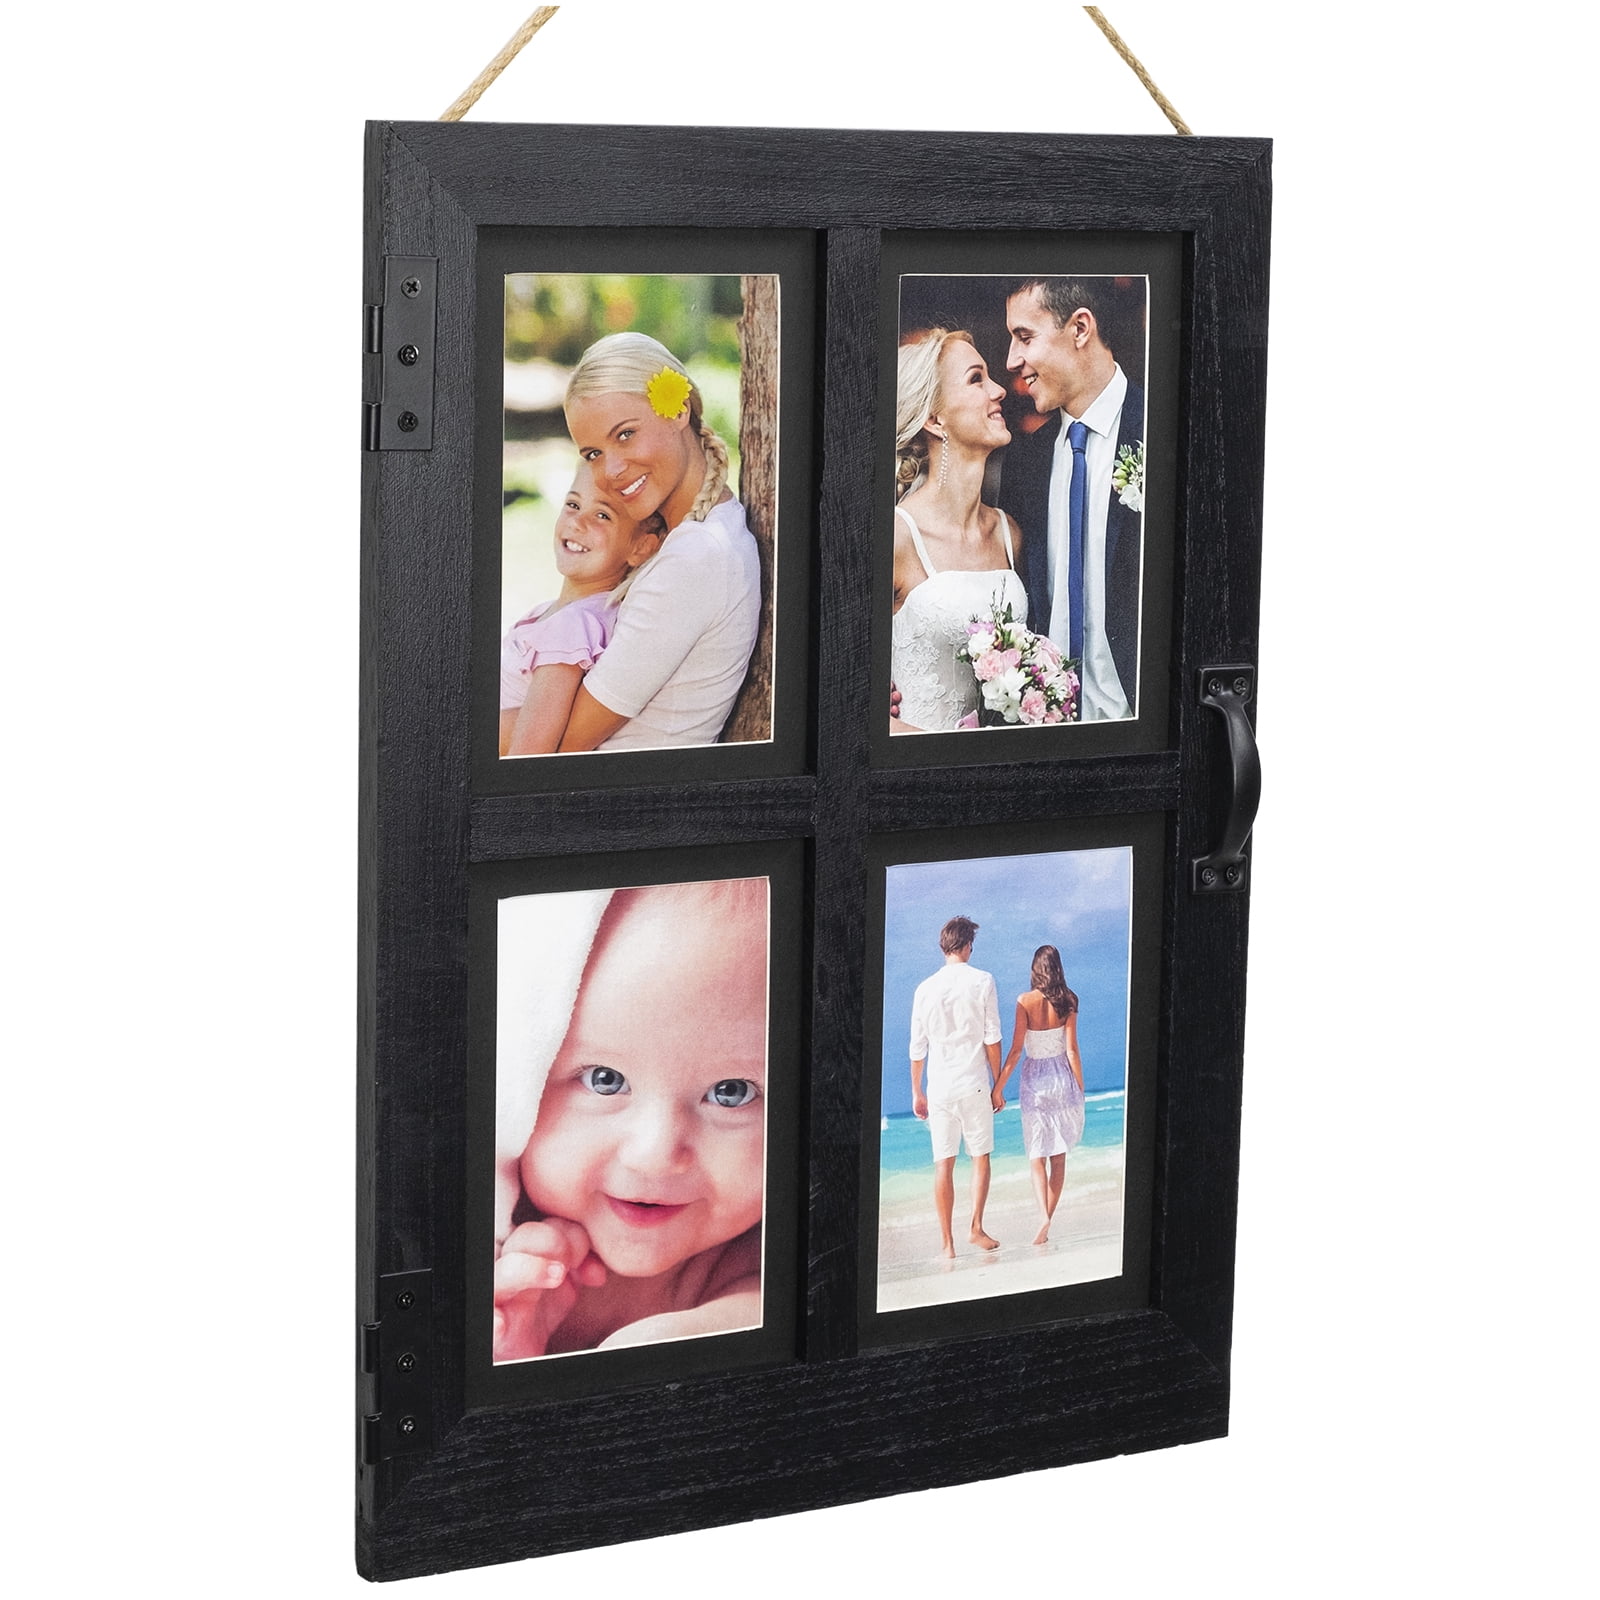 Excello Global Products Collage Picture Frames from Rustic Distressed Wood: Holds Five 4x6 Photos - EGP-HD-0024